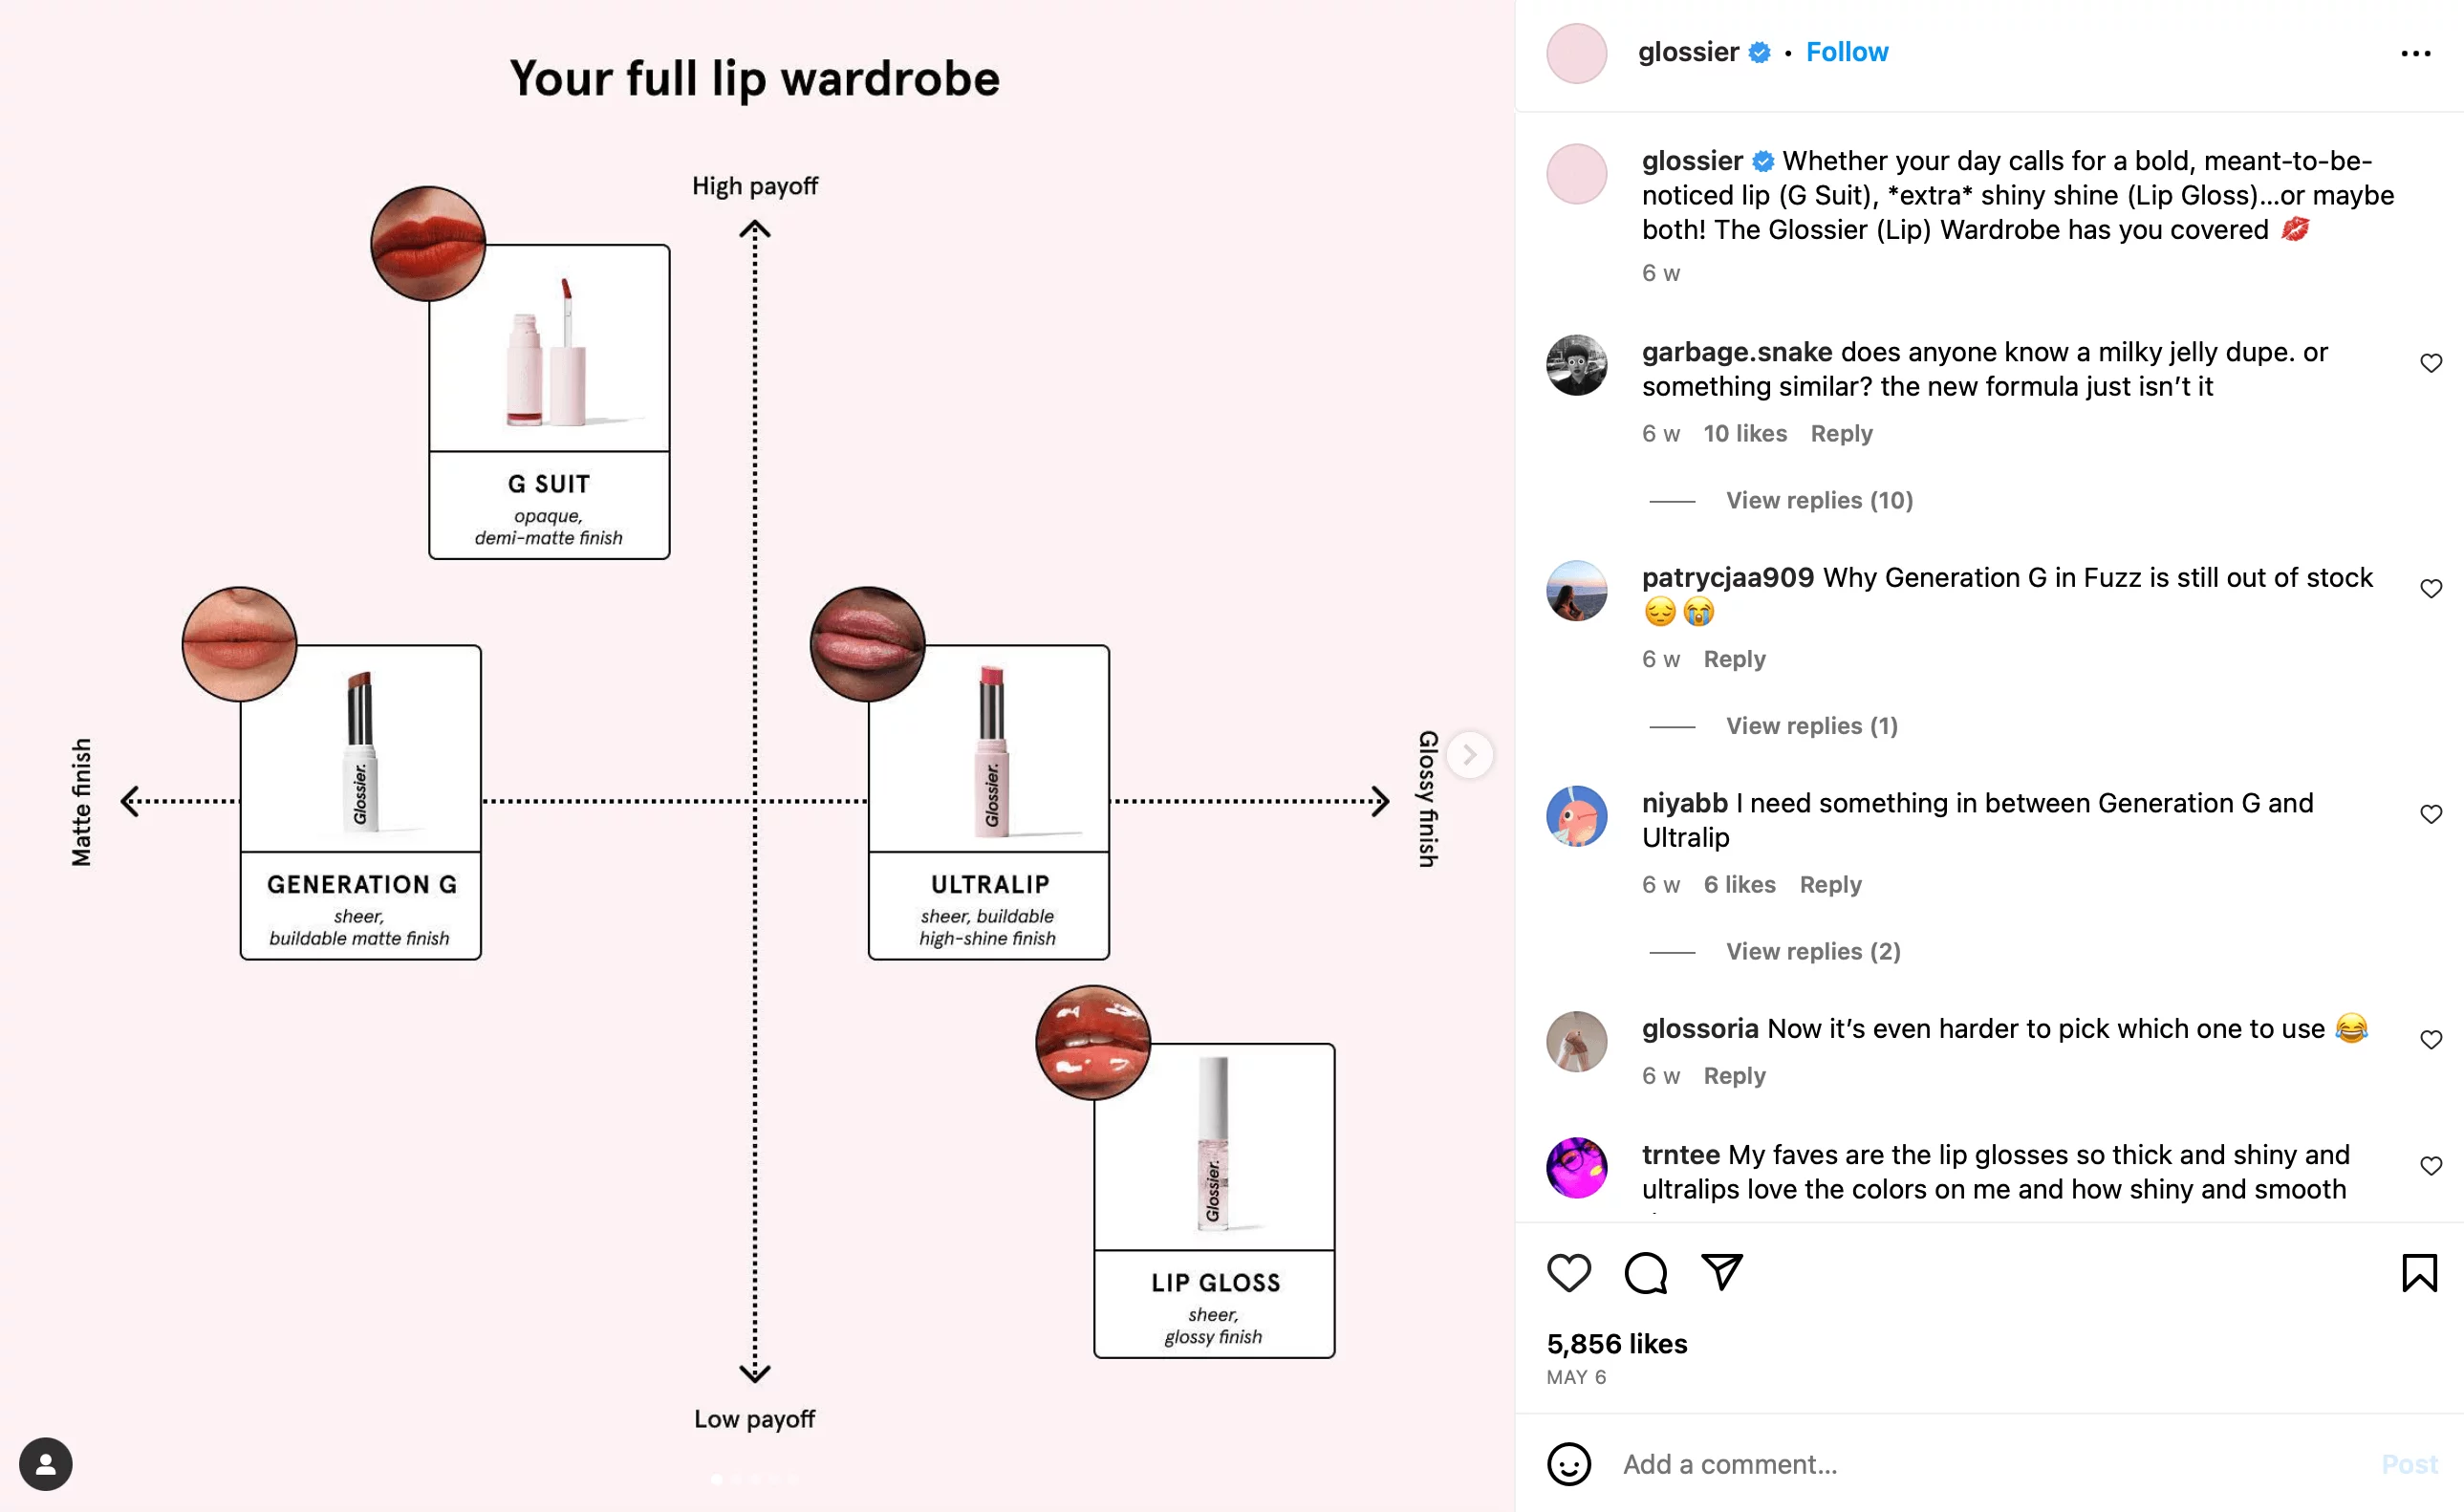 @glossier IG post with a visual representation of various lip products on a light pink background, arranged on two axes: from matte to glossy finish and from low towards high payoff.